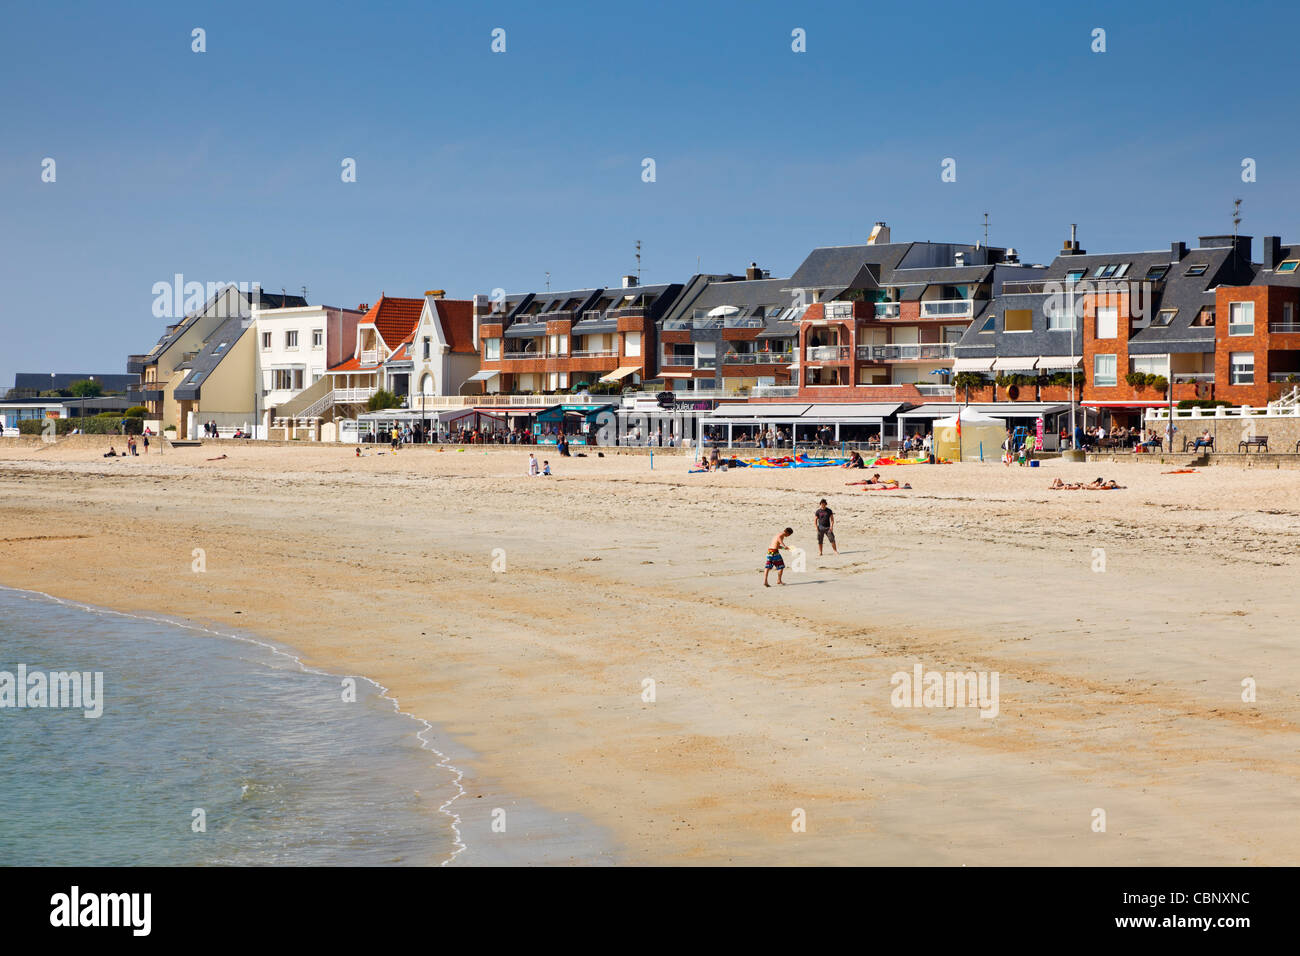 Brittany beach - Lamour Plage beach and town on the coast of Morbihan, Brittany, France Stock Photo